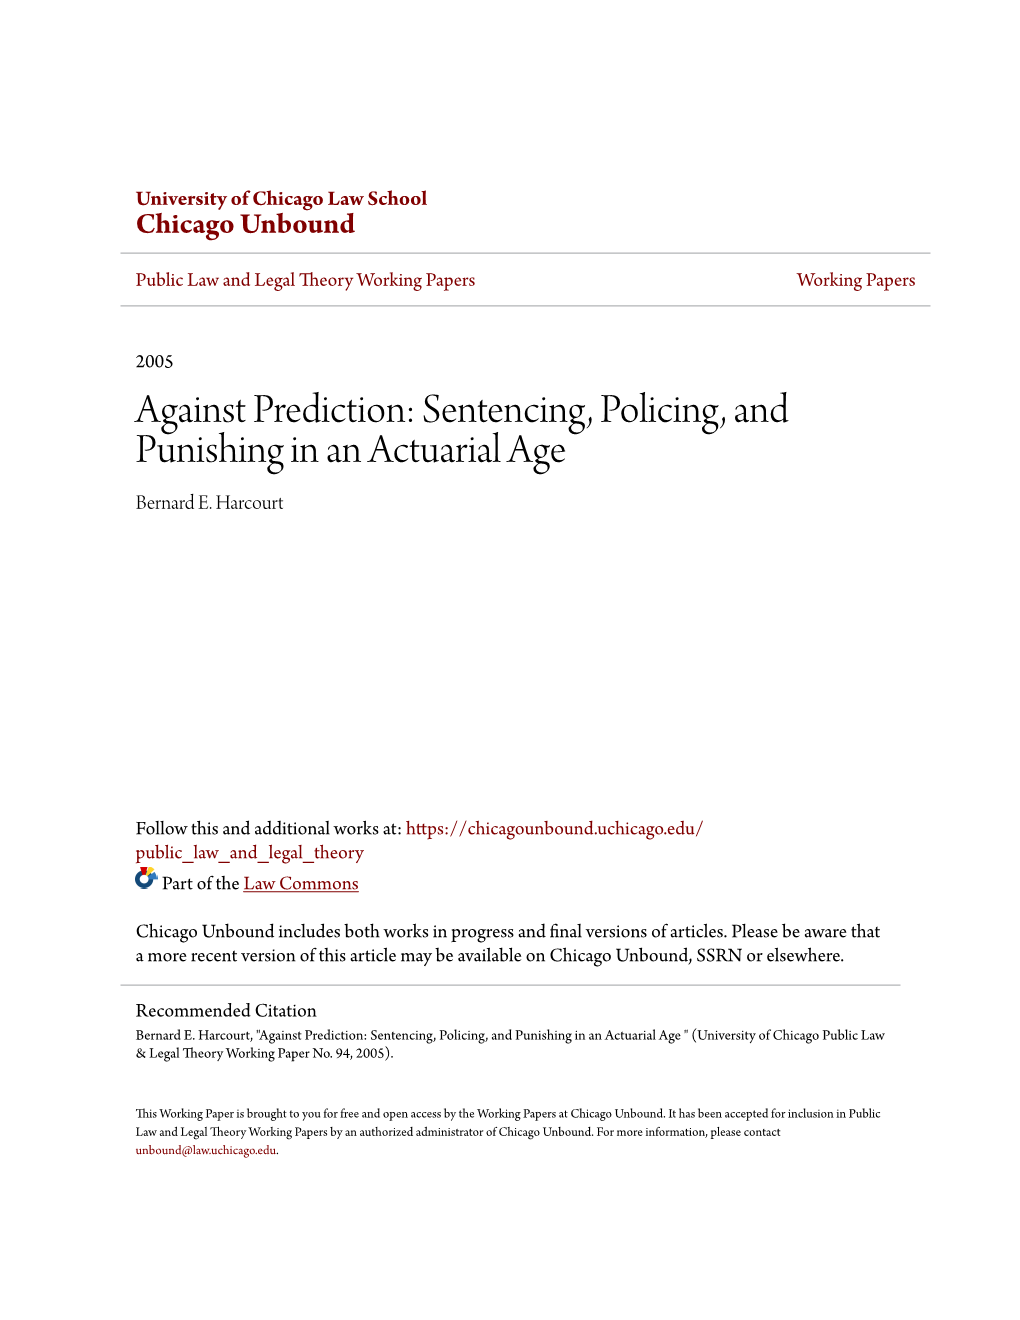 Against Prediction: Sentencing, Policing, and Punishing in an Actuarial Age Bernard E